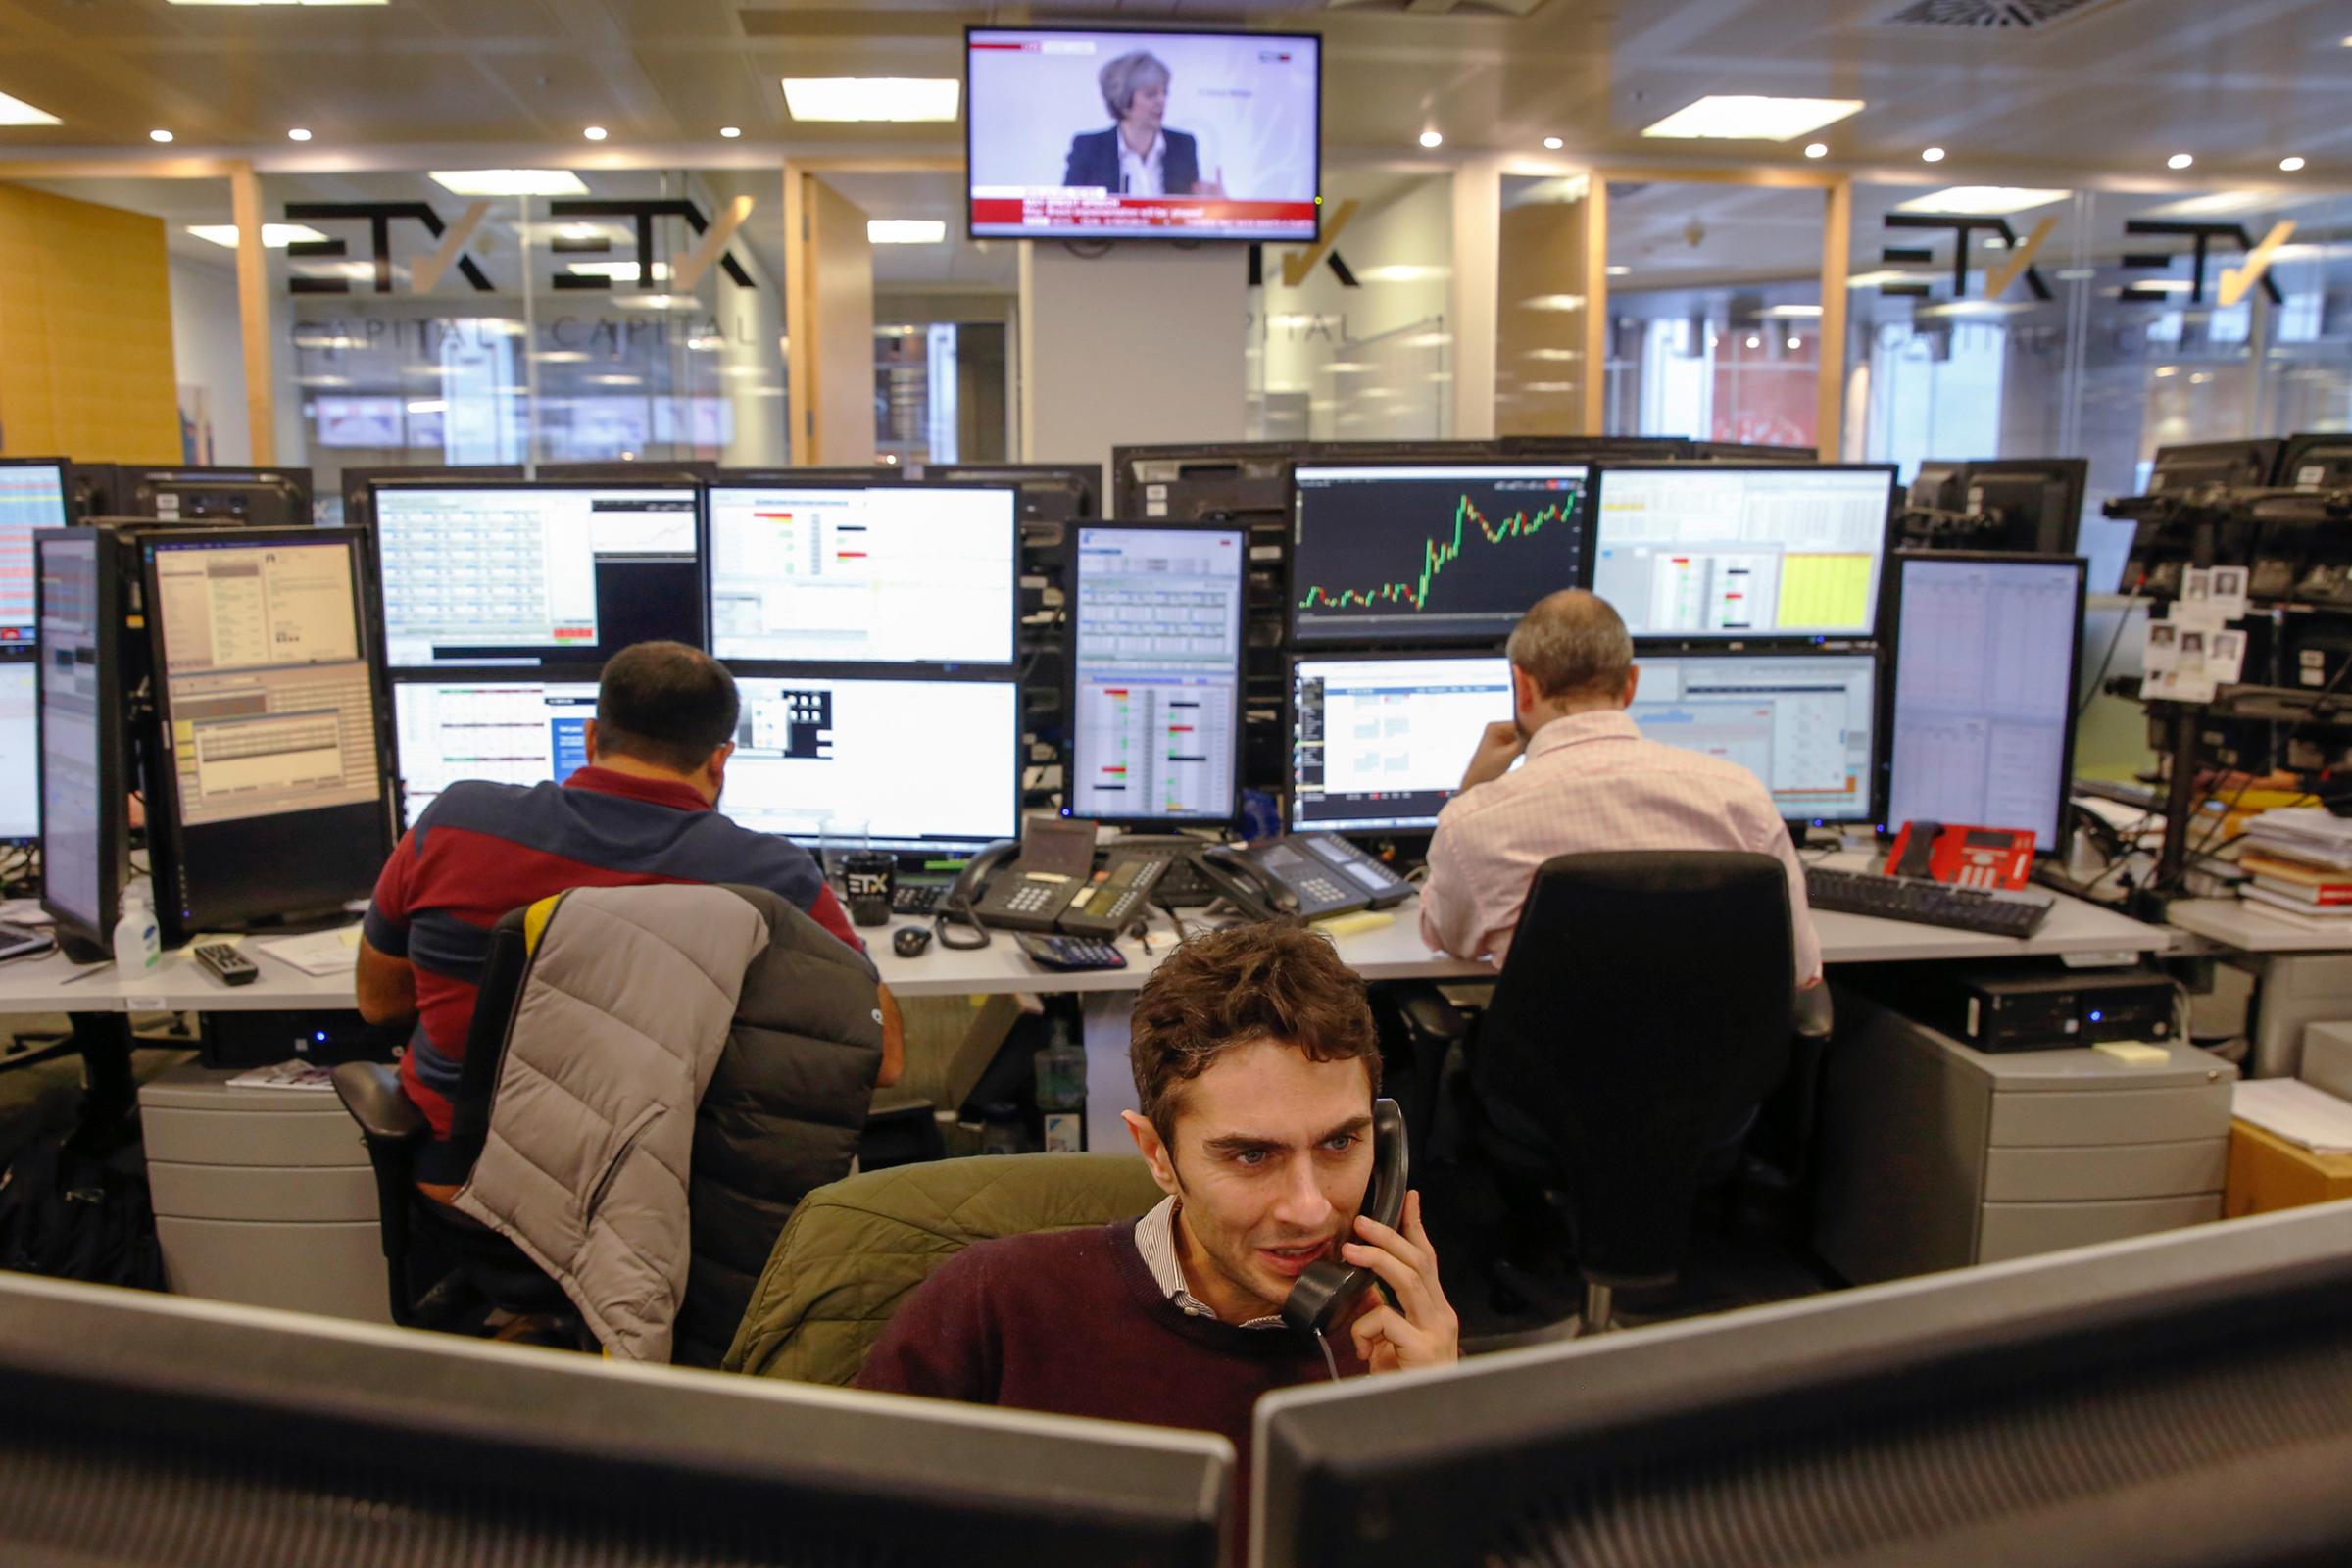 A television displays Theresa May's Brexit speech as traders monitor financial data on the trading floor at broker ETX Capital in London on Jan. 17, 2017.